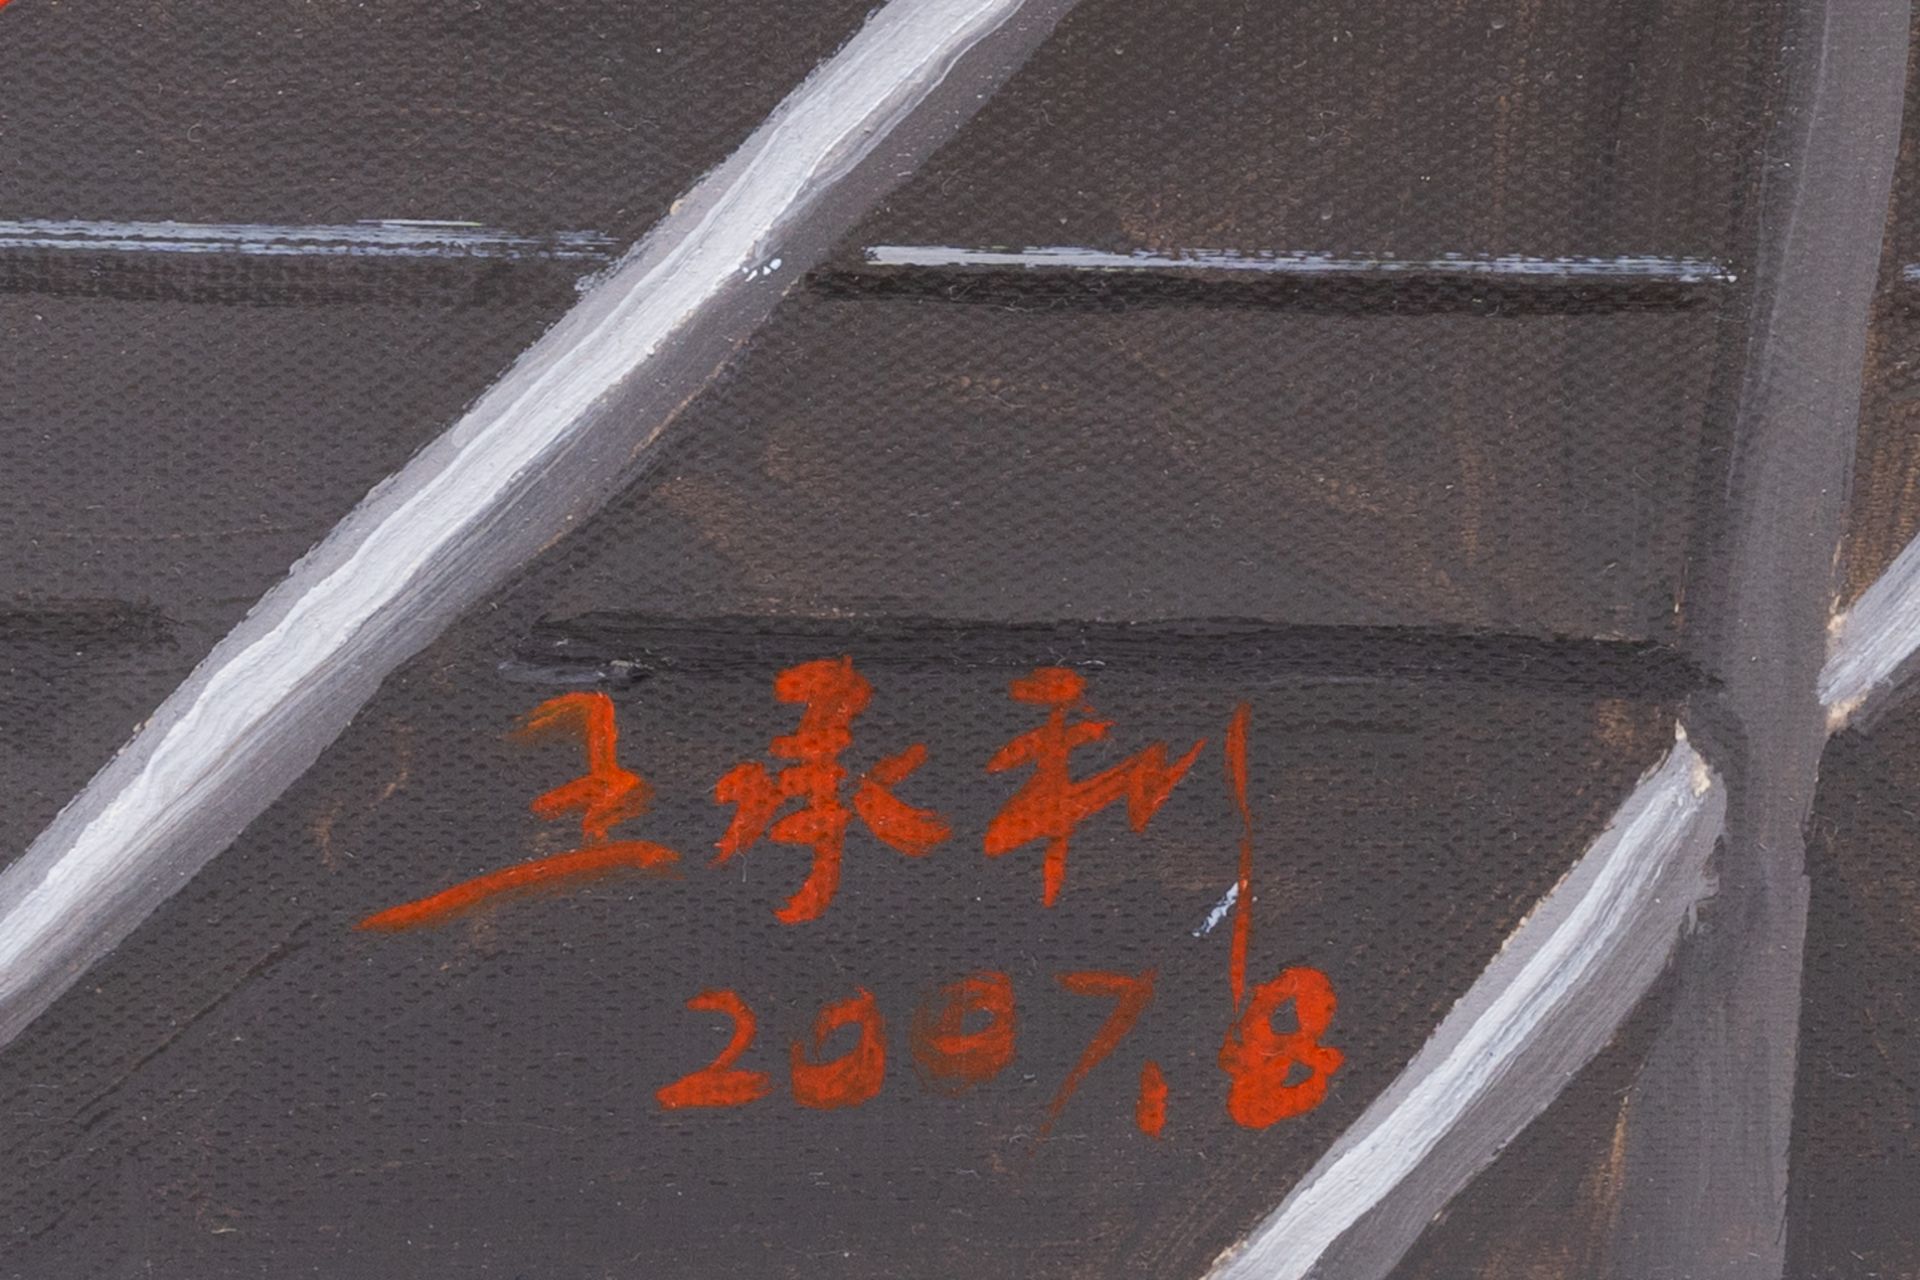 Wang Chengli (1968): 'Modern City', oil on canvas, dated 2007 - Image 4 of 6